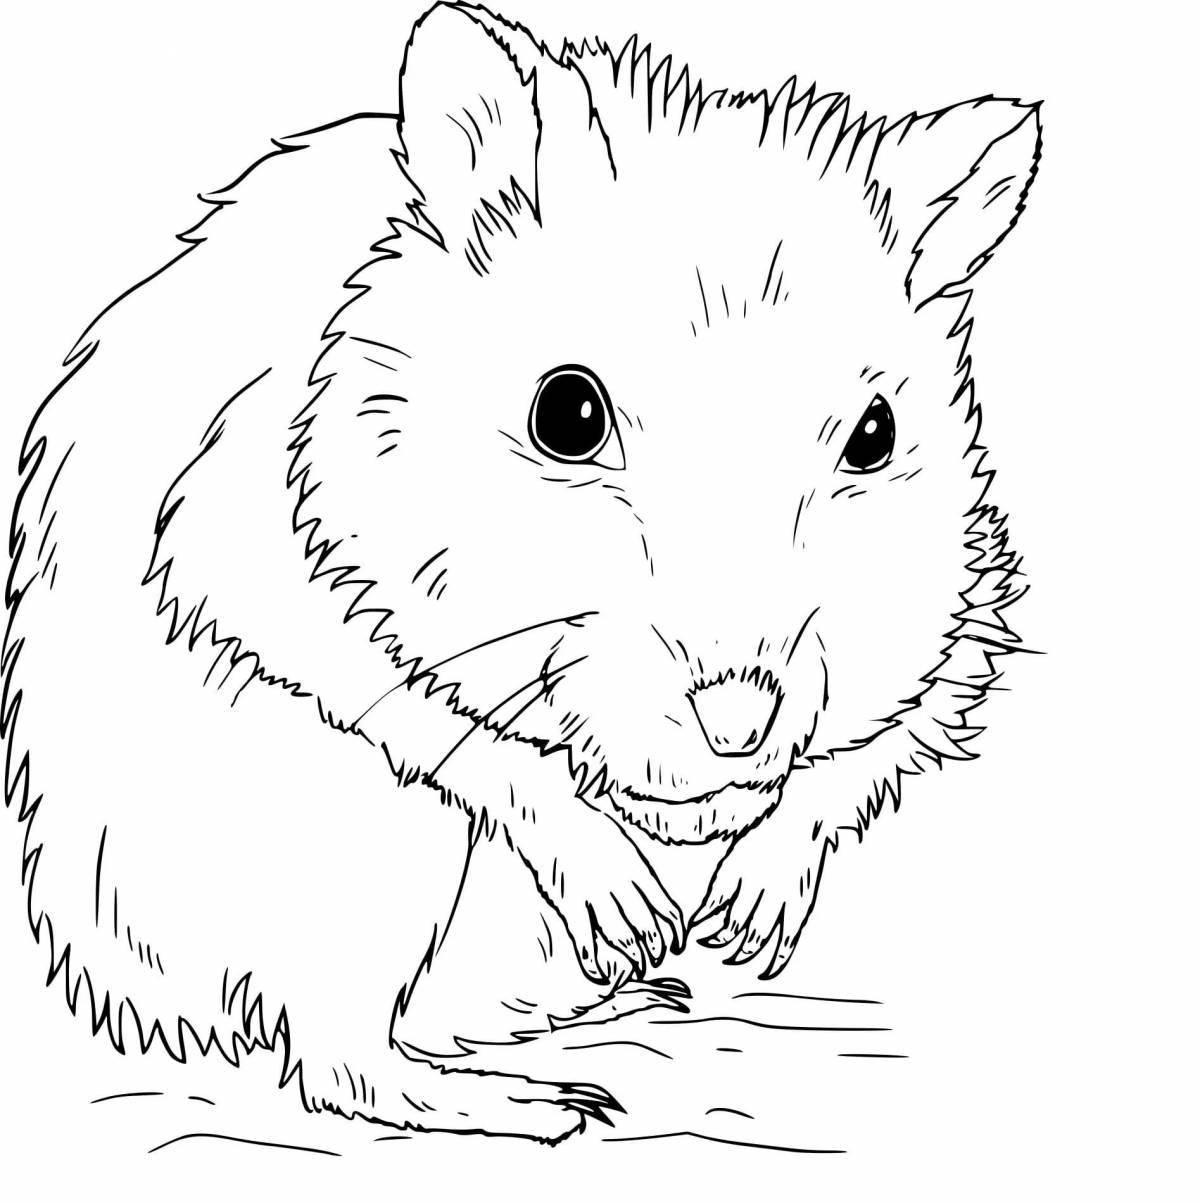 Hamster coloring book for kids